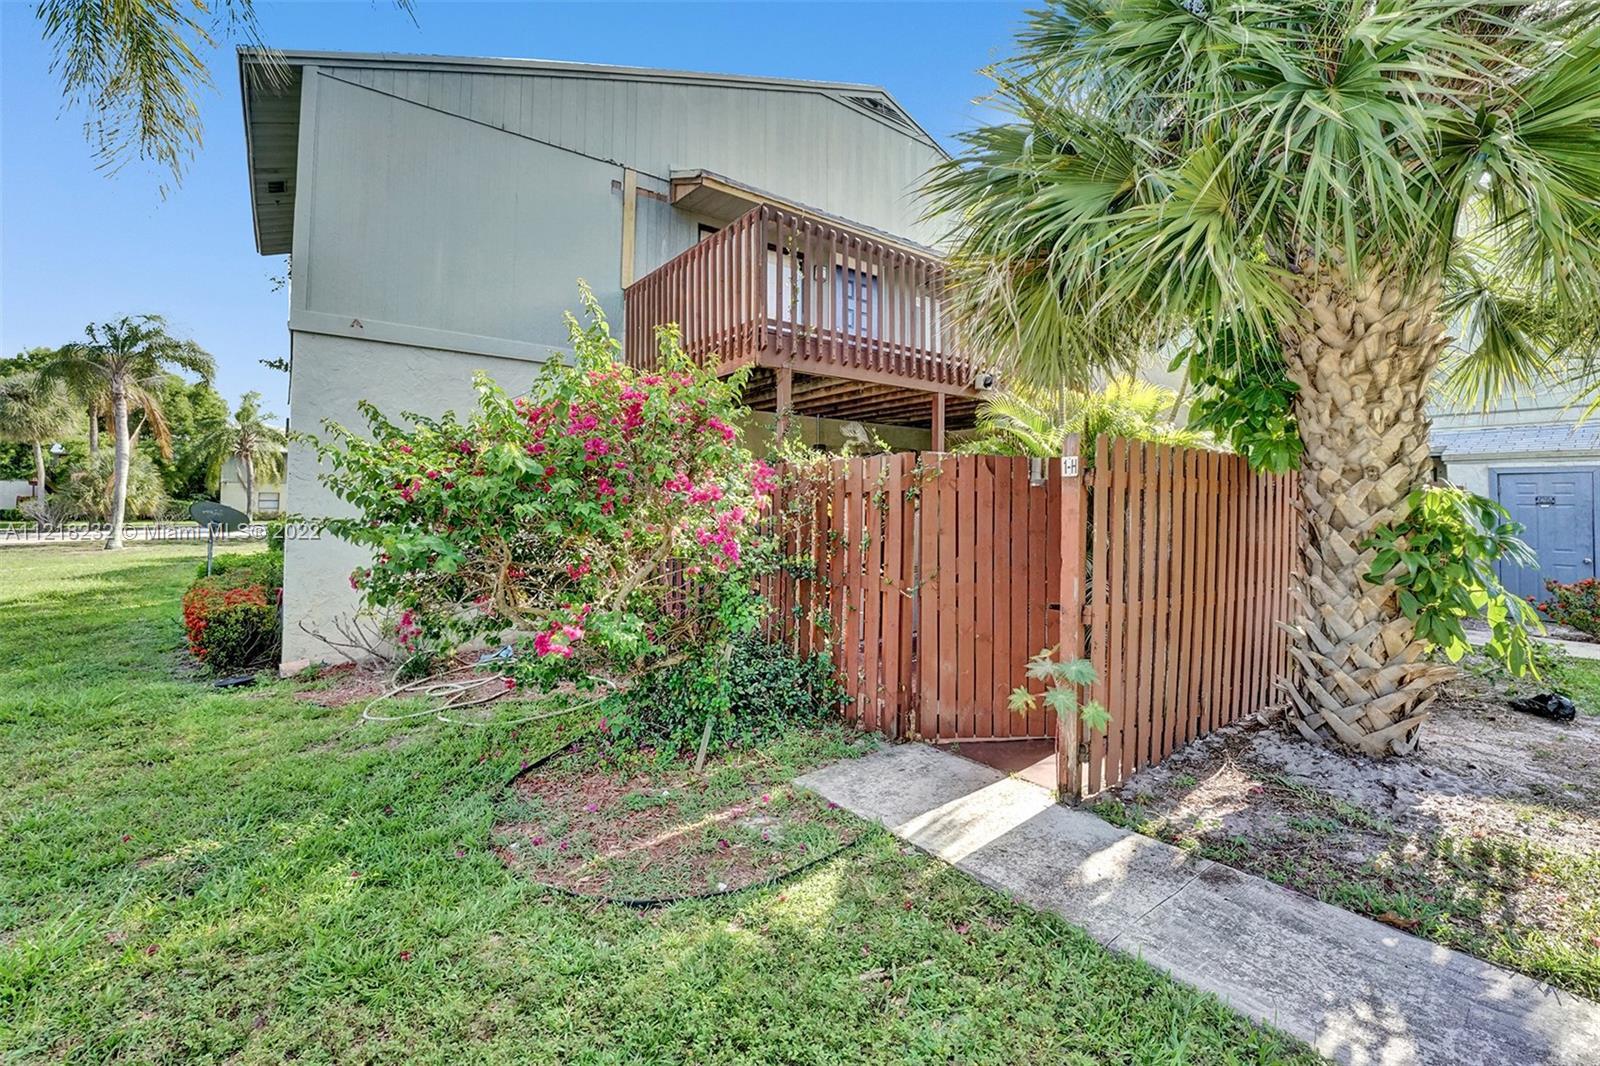 INVESTOR'S DREAM!!! Amazing Condo located few minutes from Boynton Beach, features 2 bedrooms and 1.